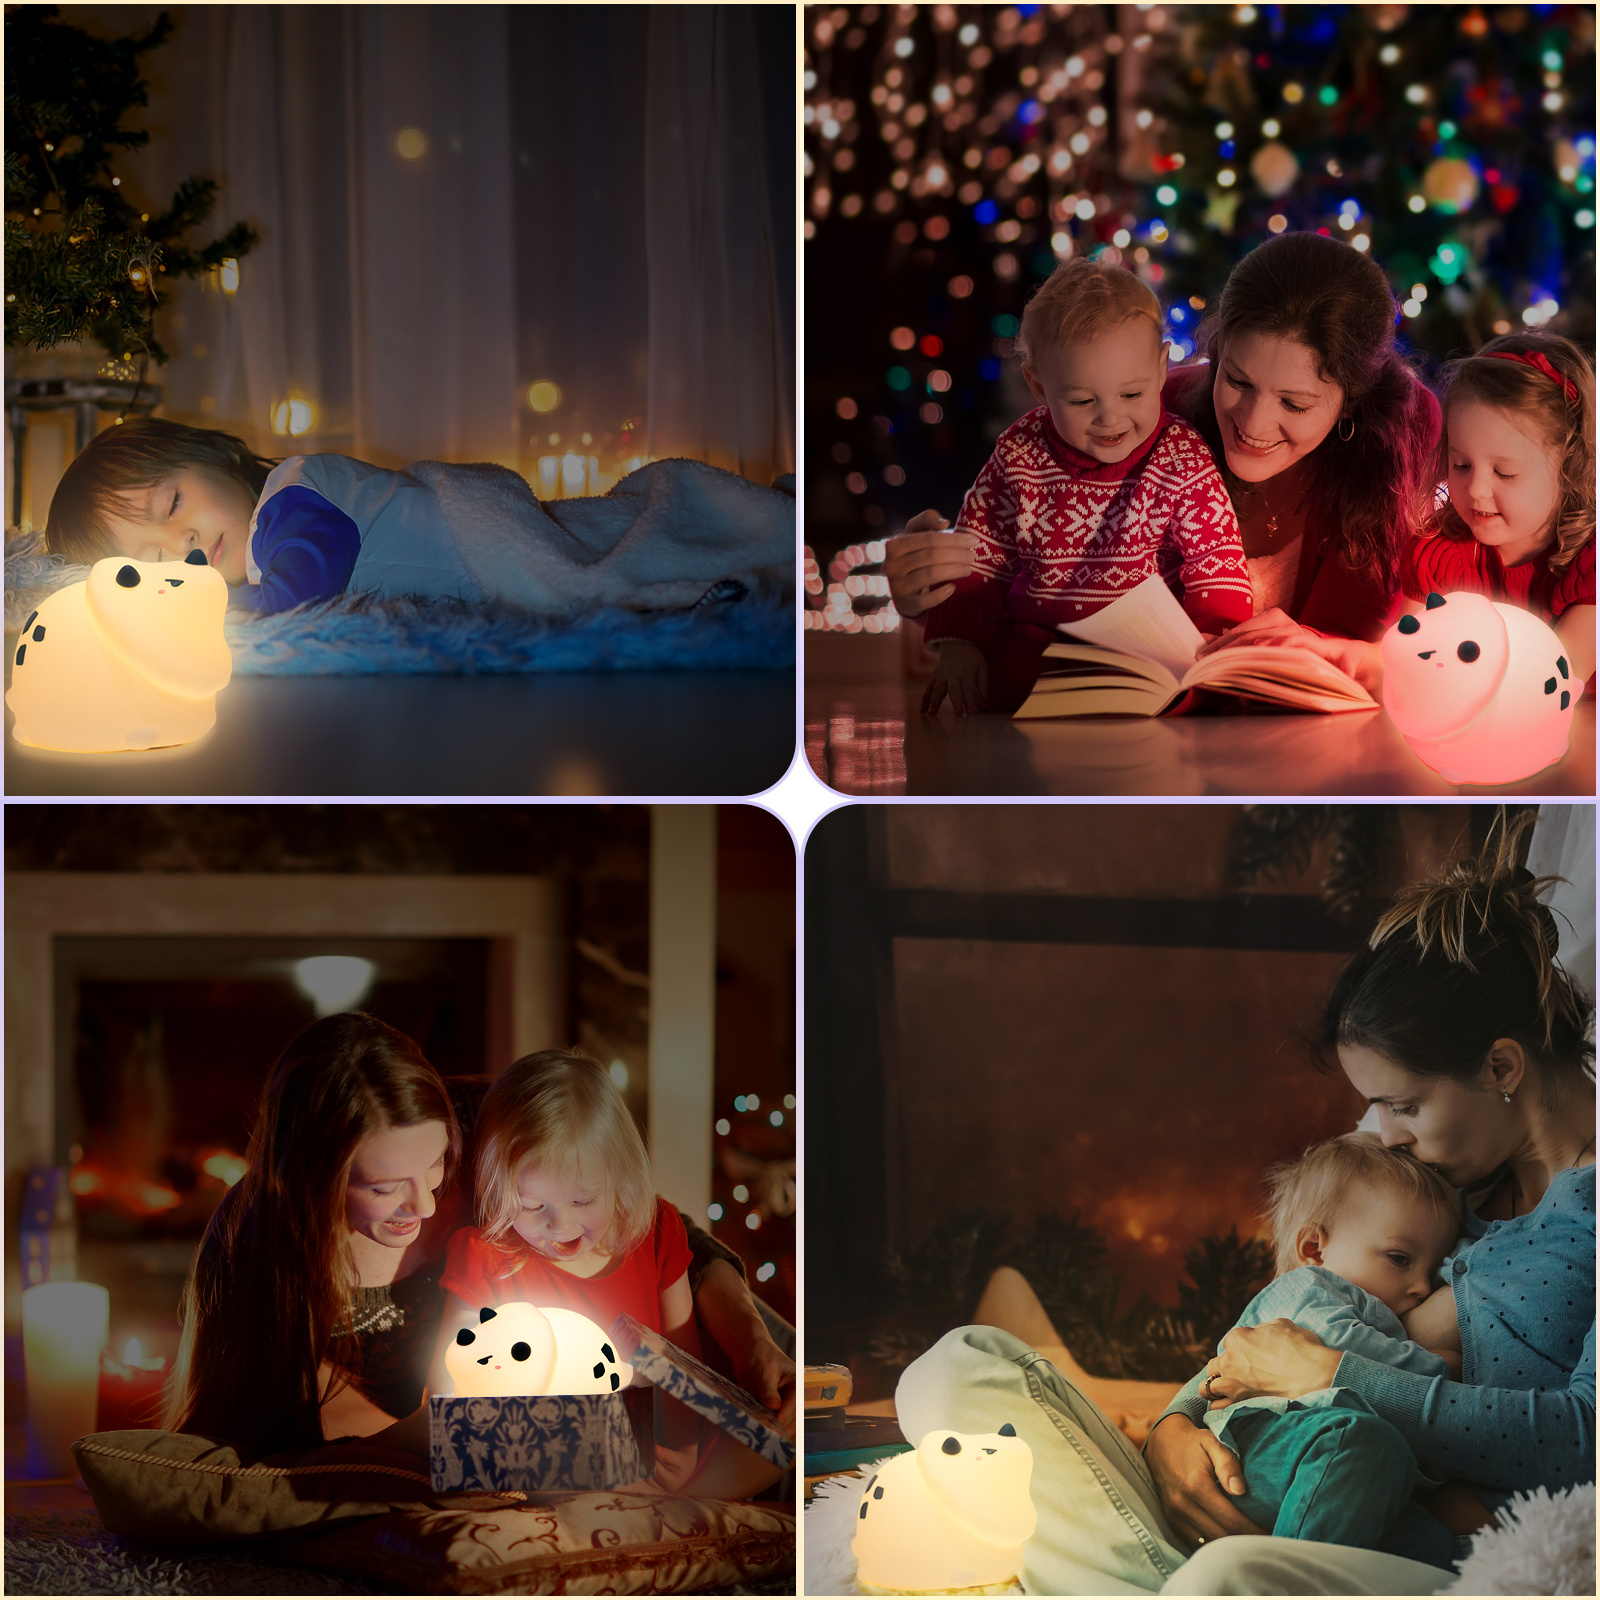 Cute Dinosaur Night Light, Kids Soft Silicone Bedside Lamp with 7-Color Breathing Mode, Girl USB Rechargeable Animal Lamp, with Remote Control, Toddler Christmas Gifts